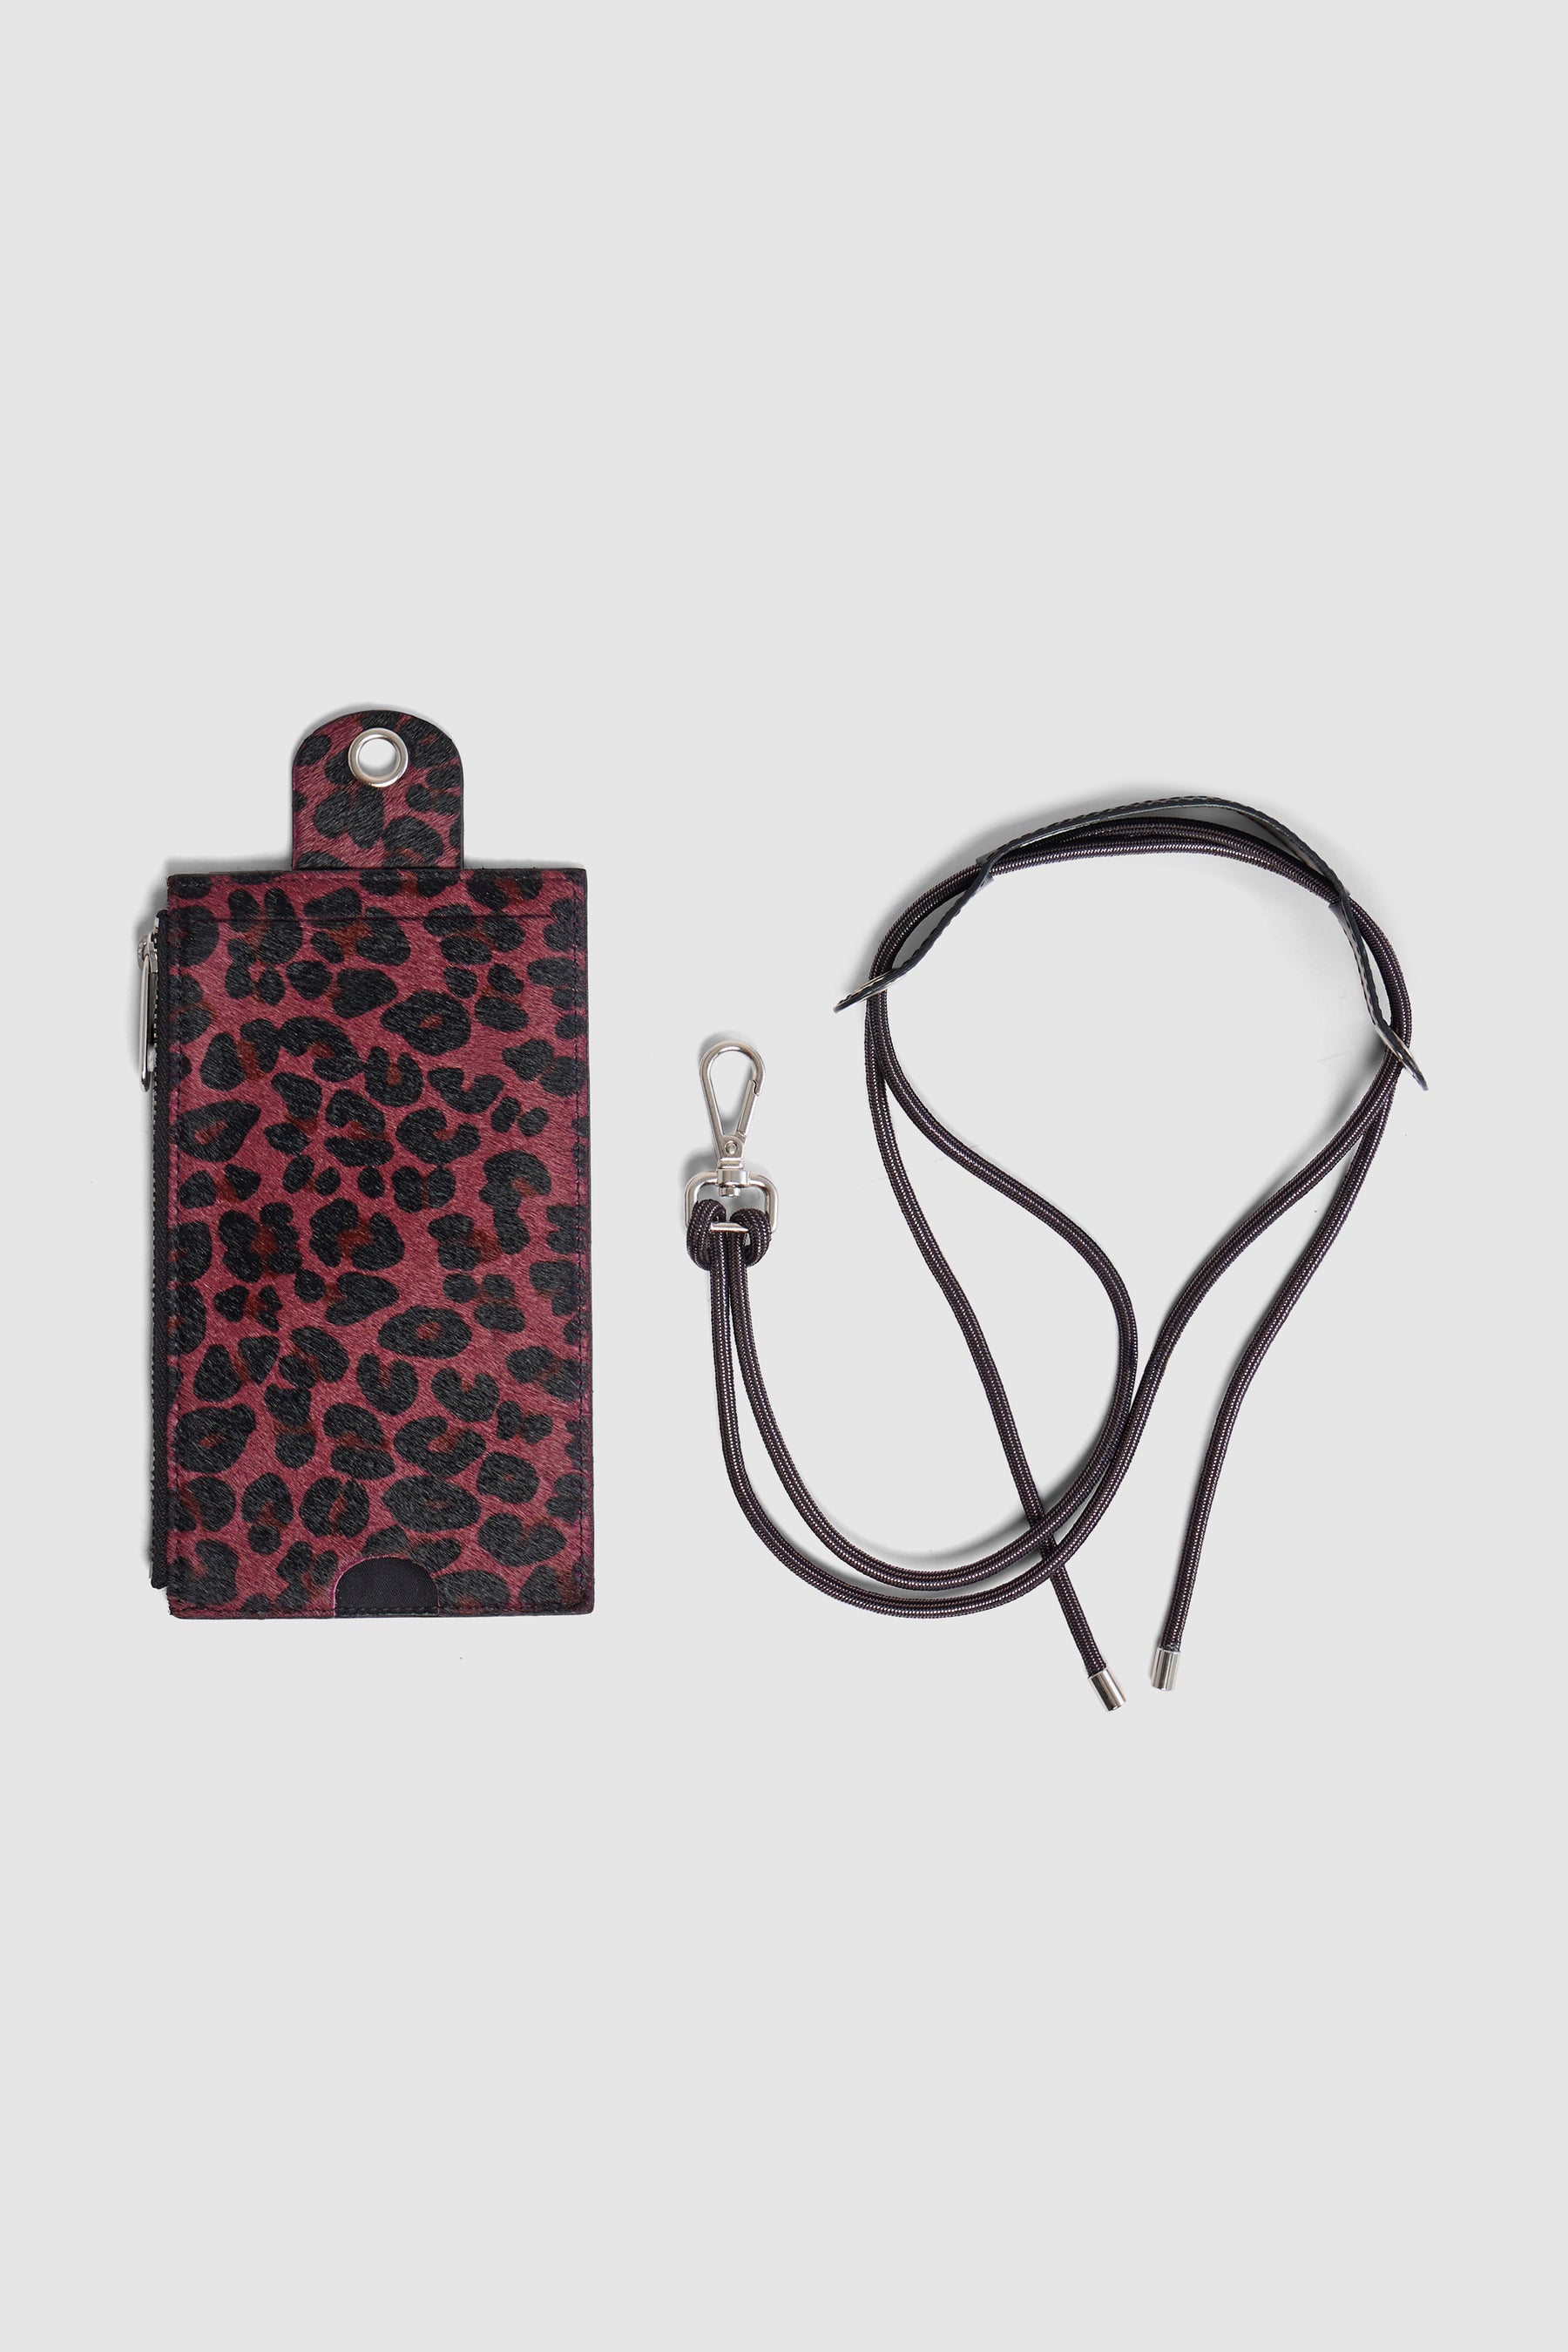 The Minis - Large neck wallet in burgundy Leopard printed leather